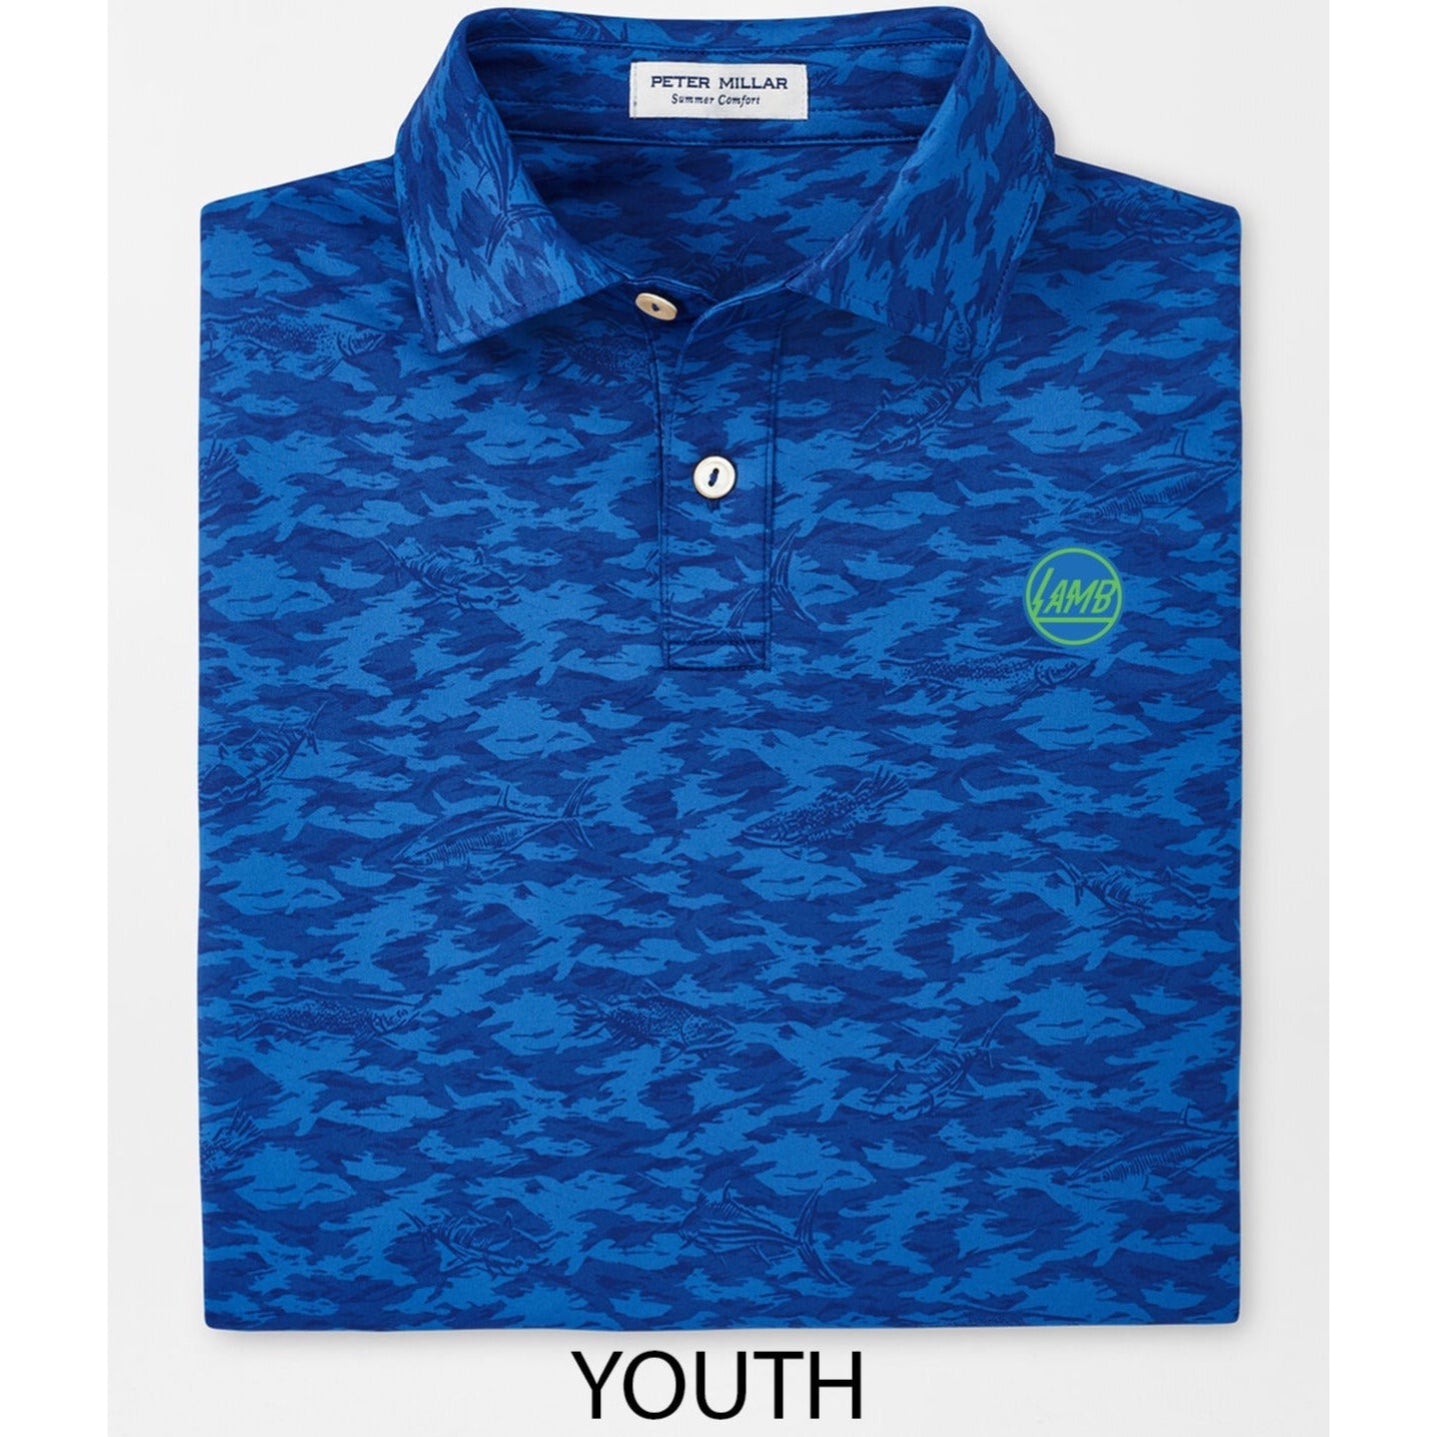 Youth Peter Millar Fish Camo Youth Performance Jersey Polo - Lamb Crafted